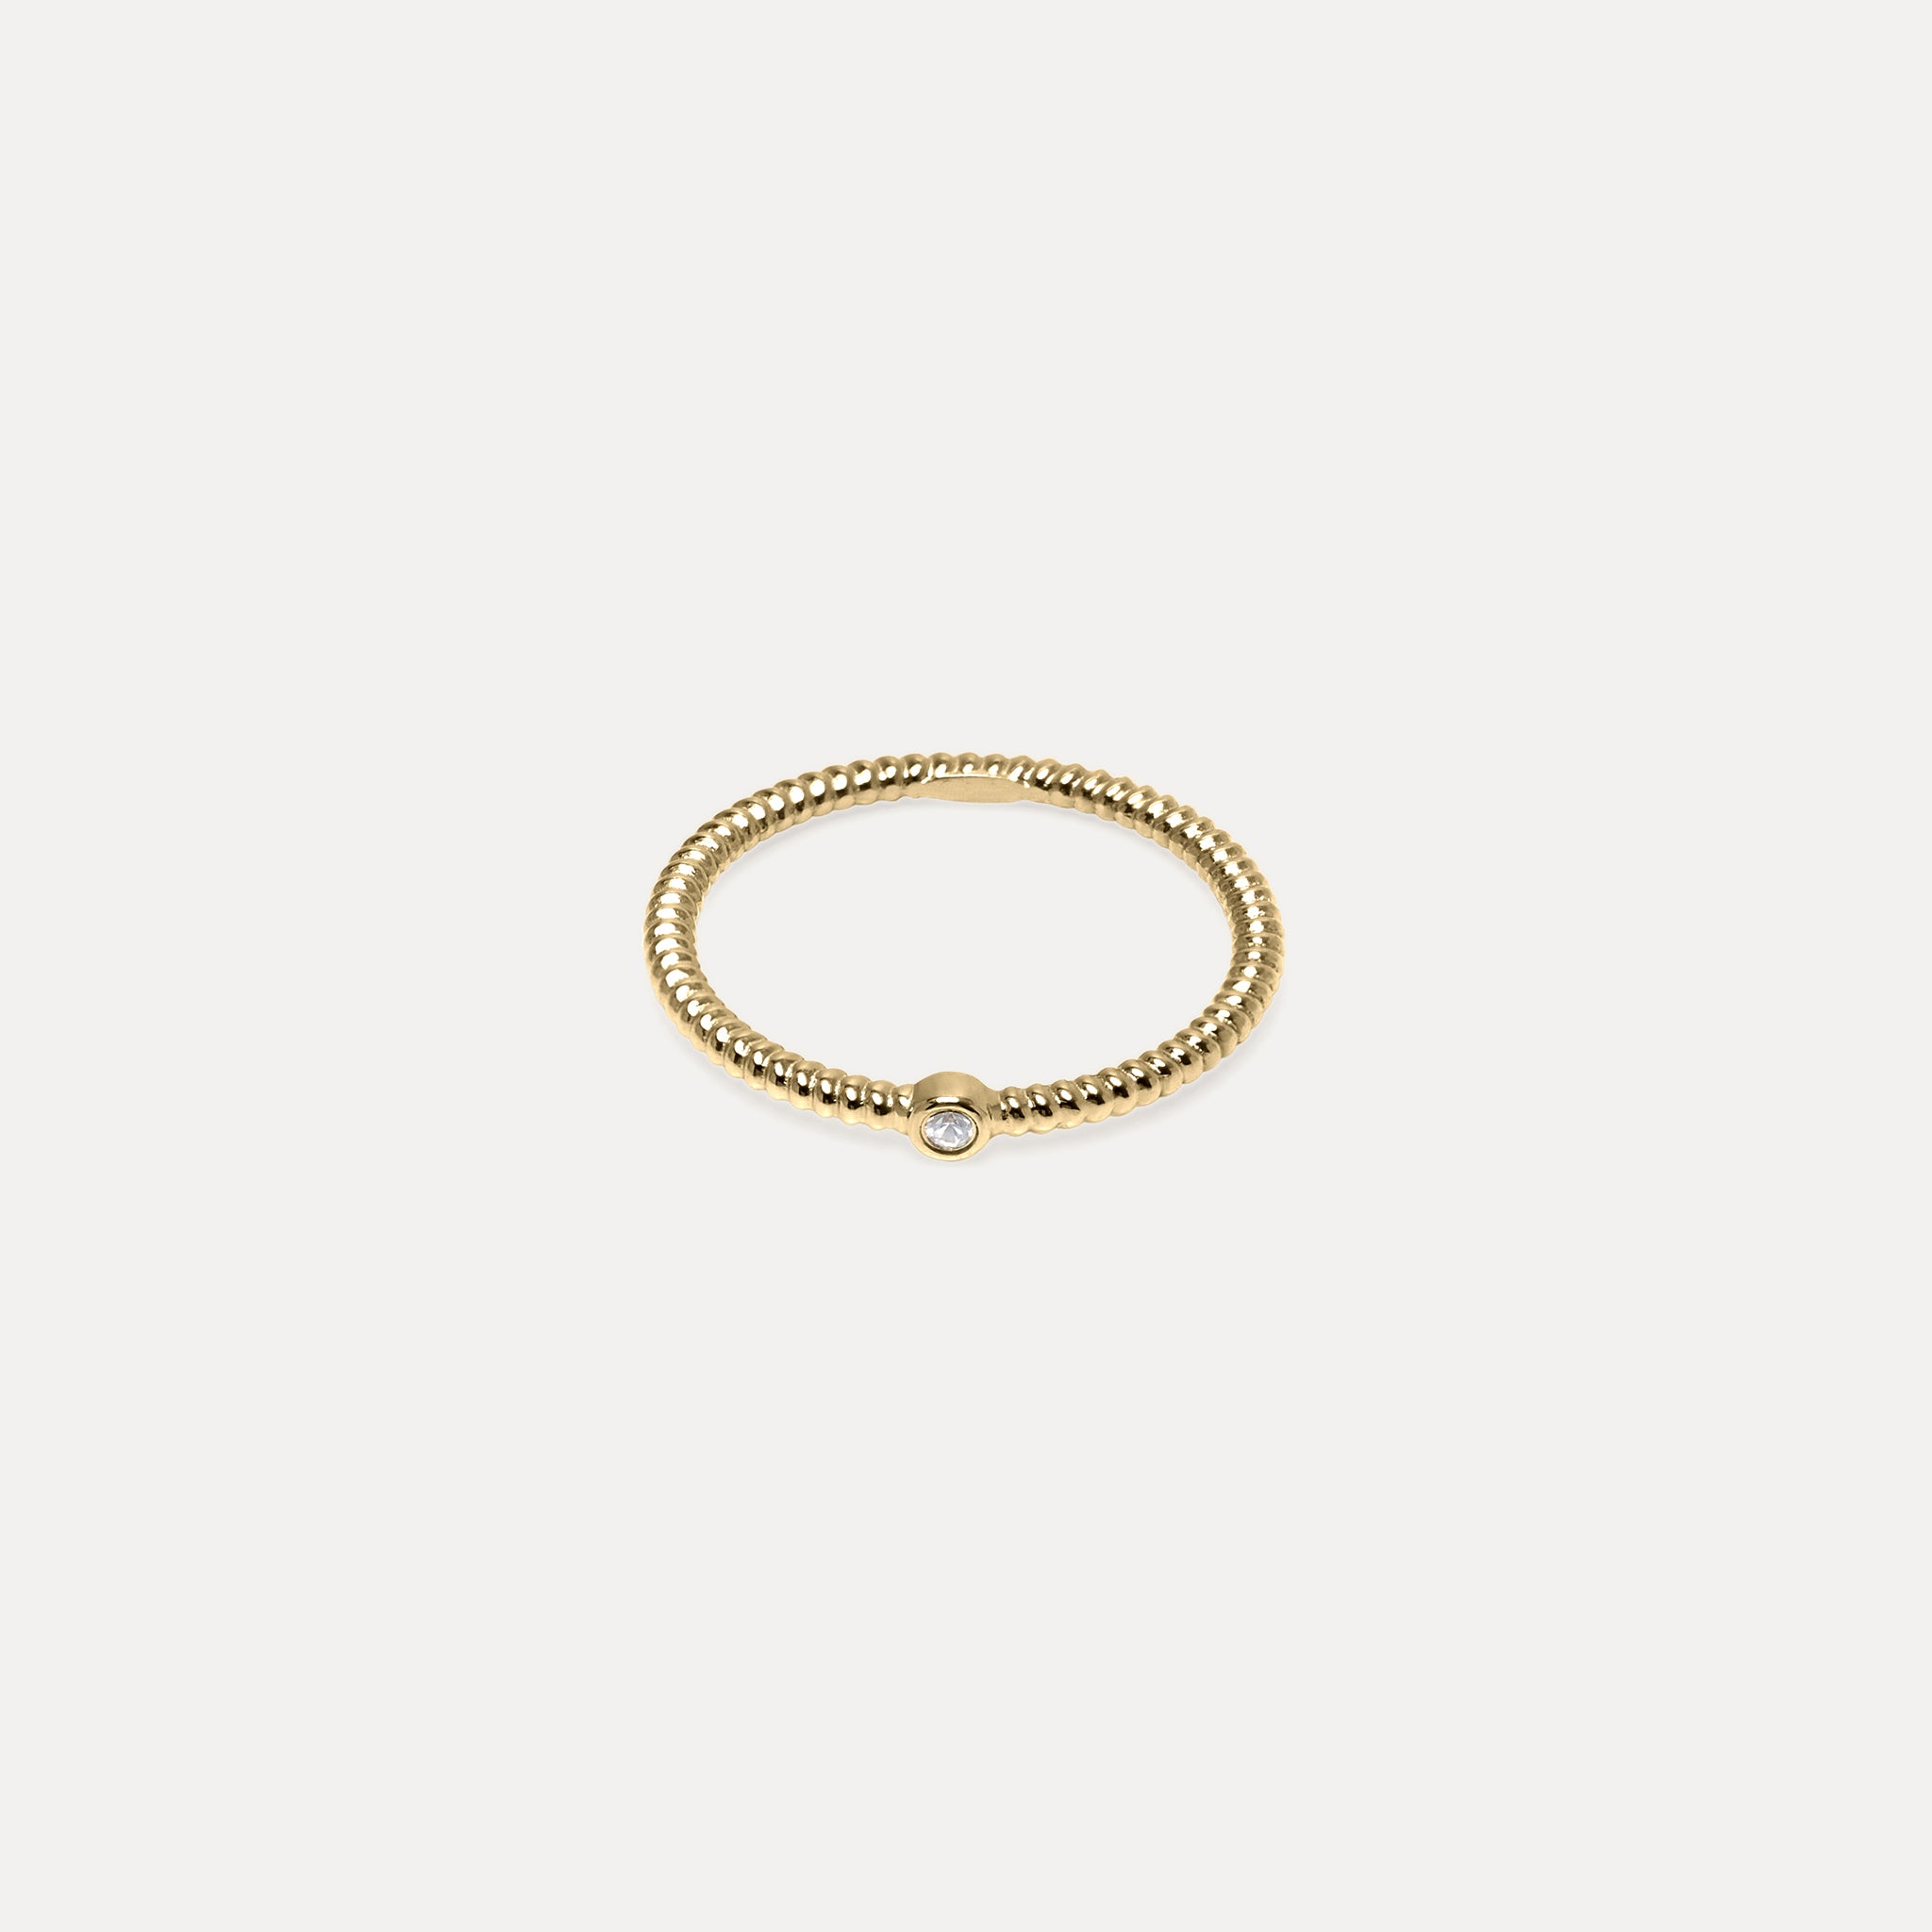 Snake Tail Solitaire Ring 14k Massivgold Weißer Saphir